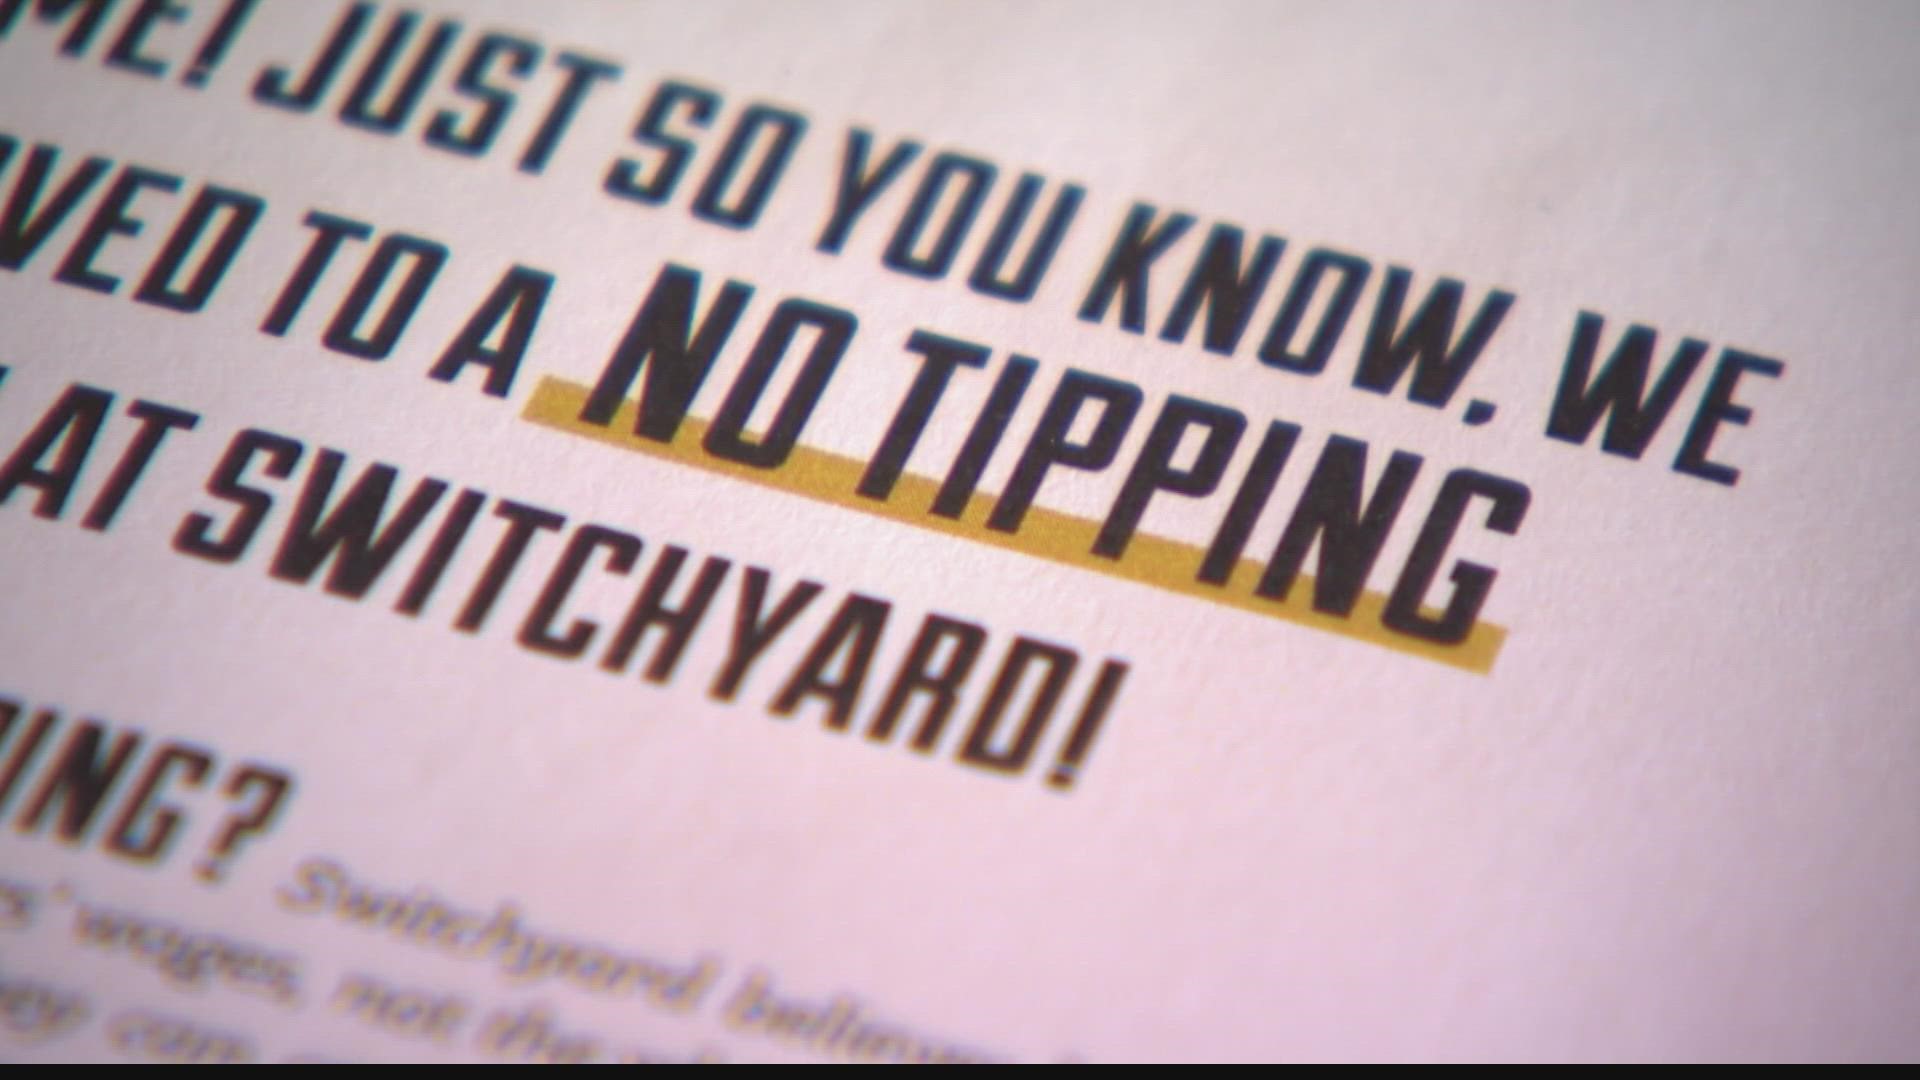 Switchyard Brewing Company is increasing workers' pay and adding benefits, but is barring tips from the customers.